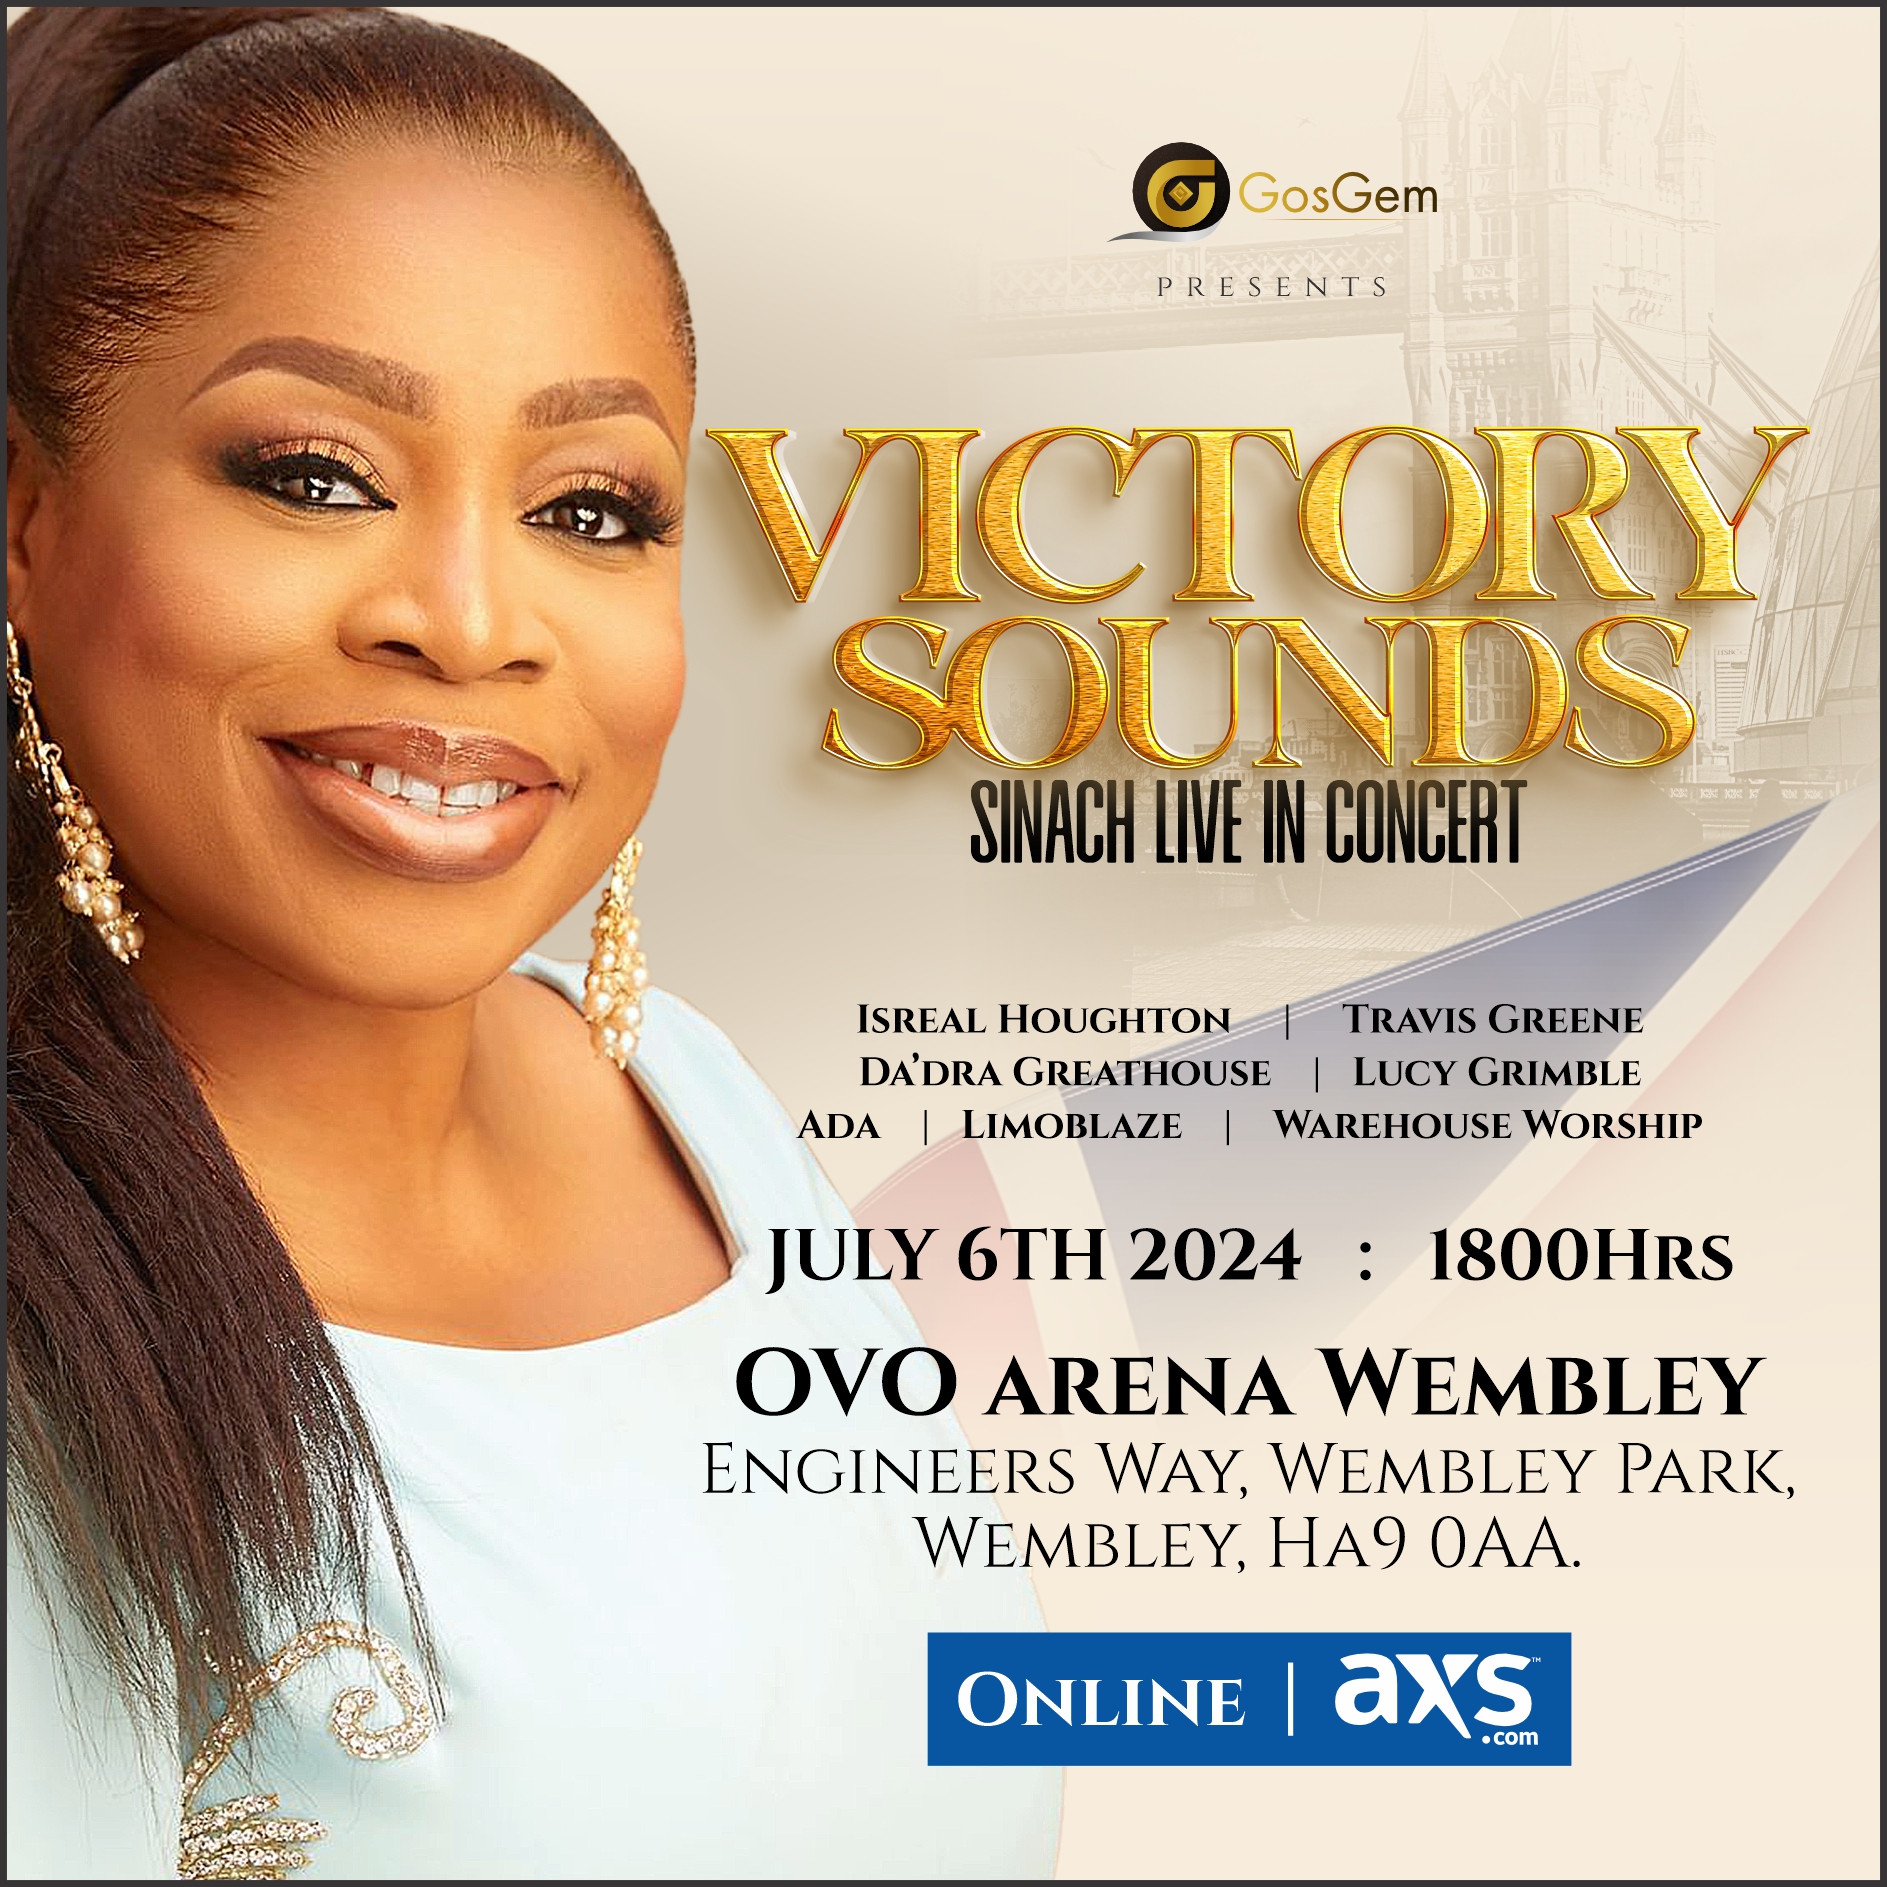 Victory Sounds (SInach Live In Concert) – 2024